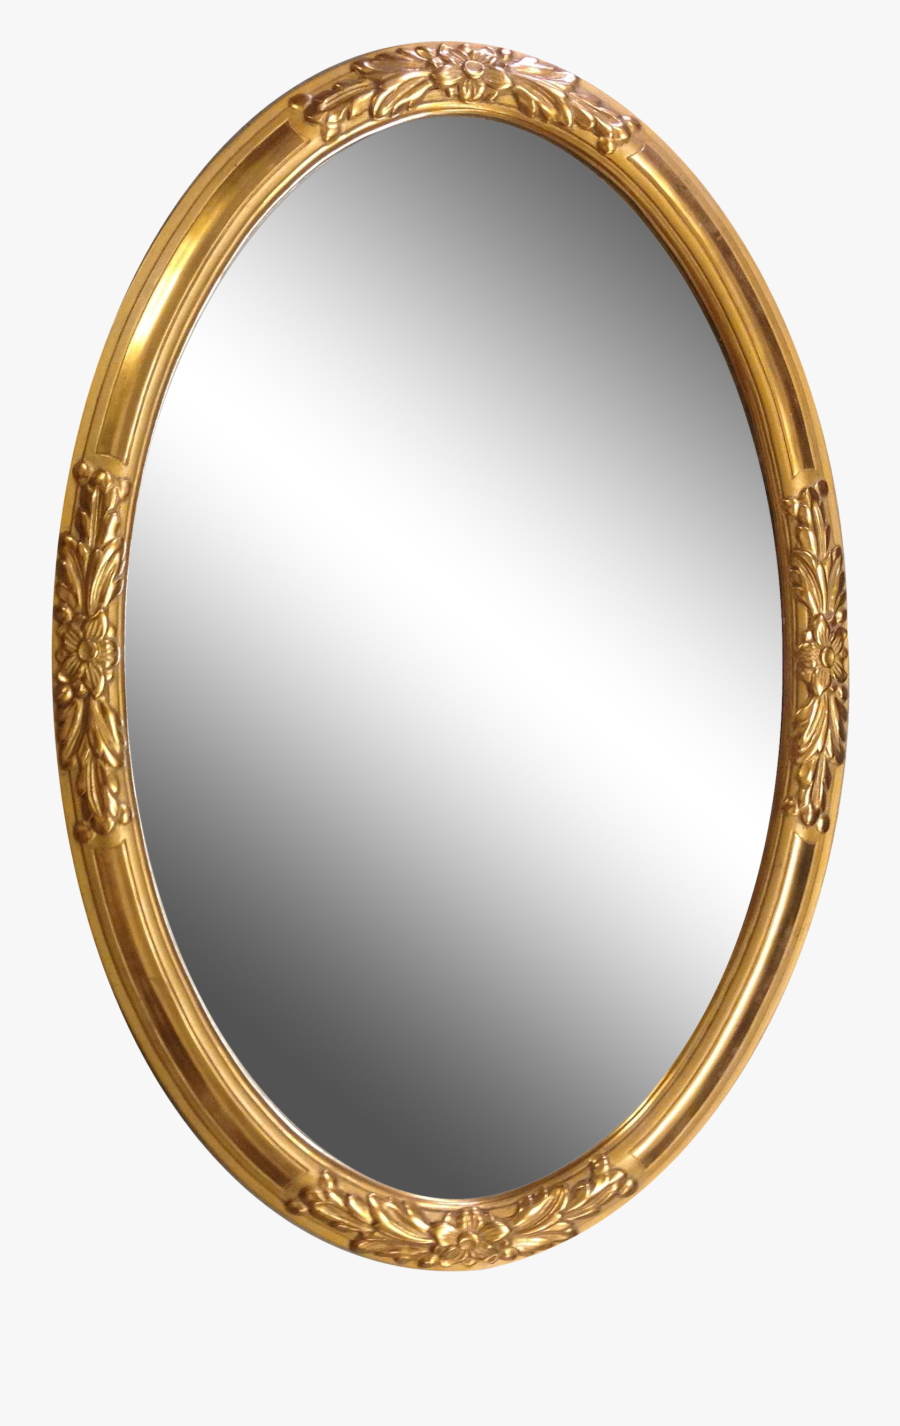 Oval Mirror Frame Png Clipart , Png Download - Oval Mirror Frame Png, Transparent Clipart